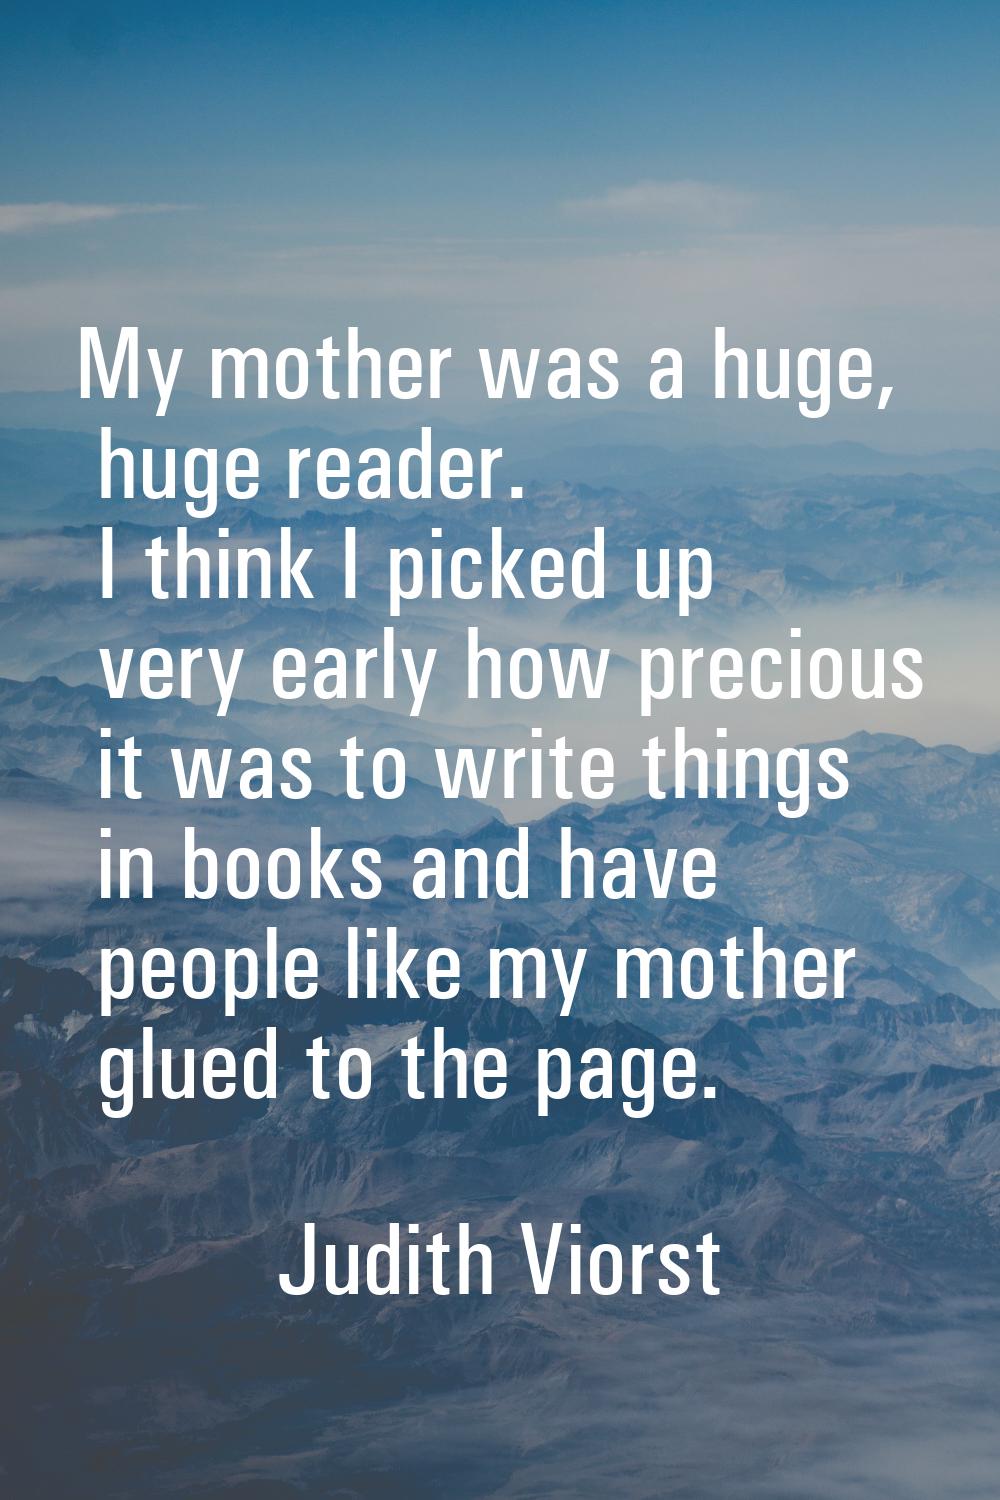 My mother was a huge, huge reader. I think I picked up very early how precious it was to write thin